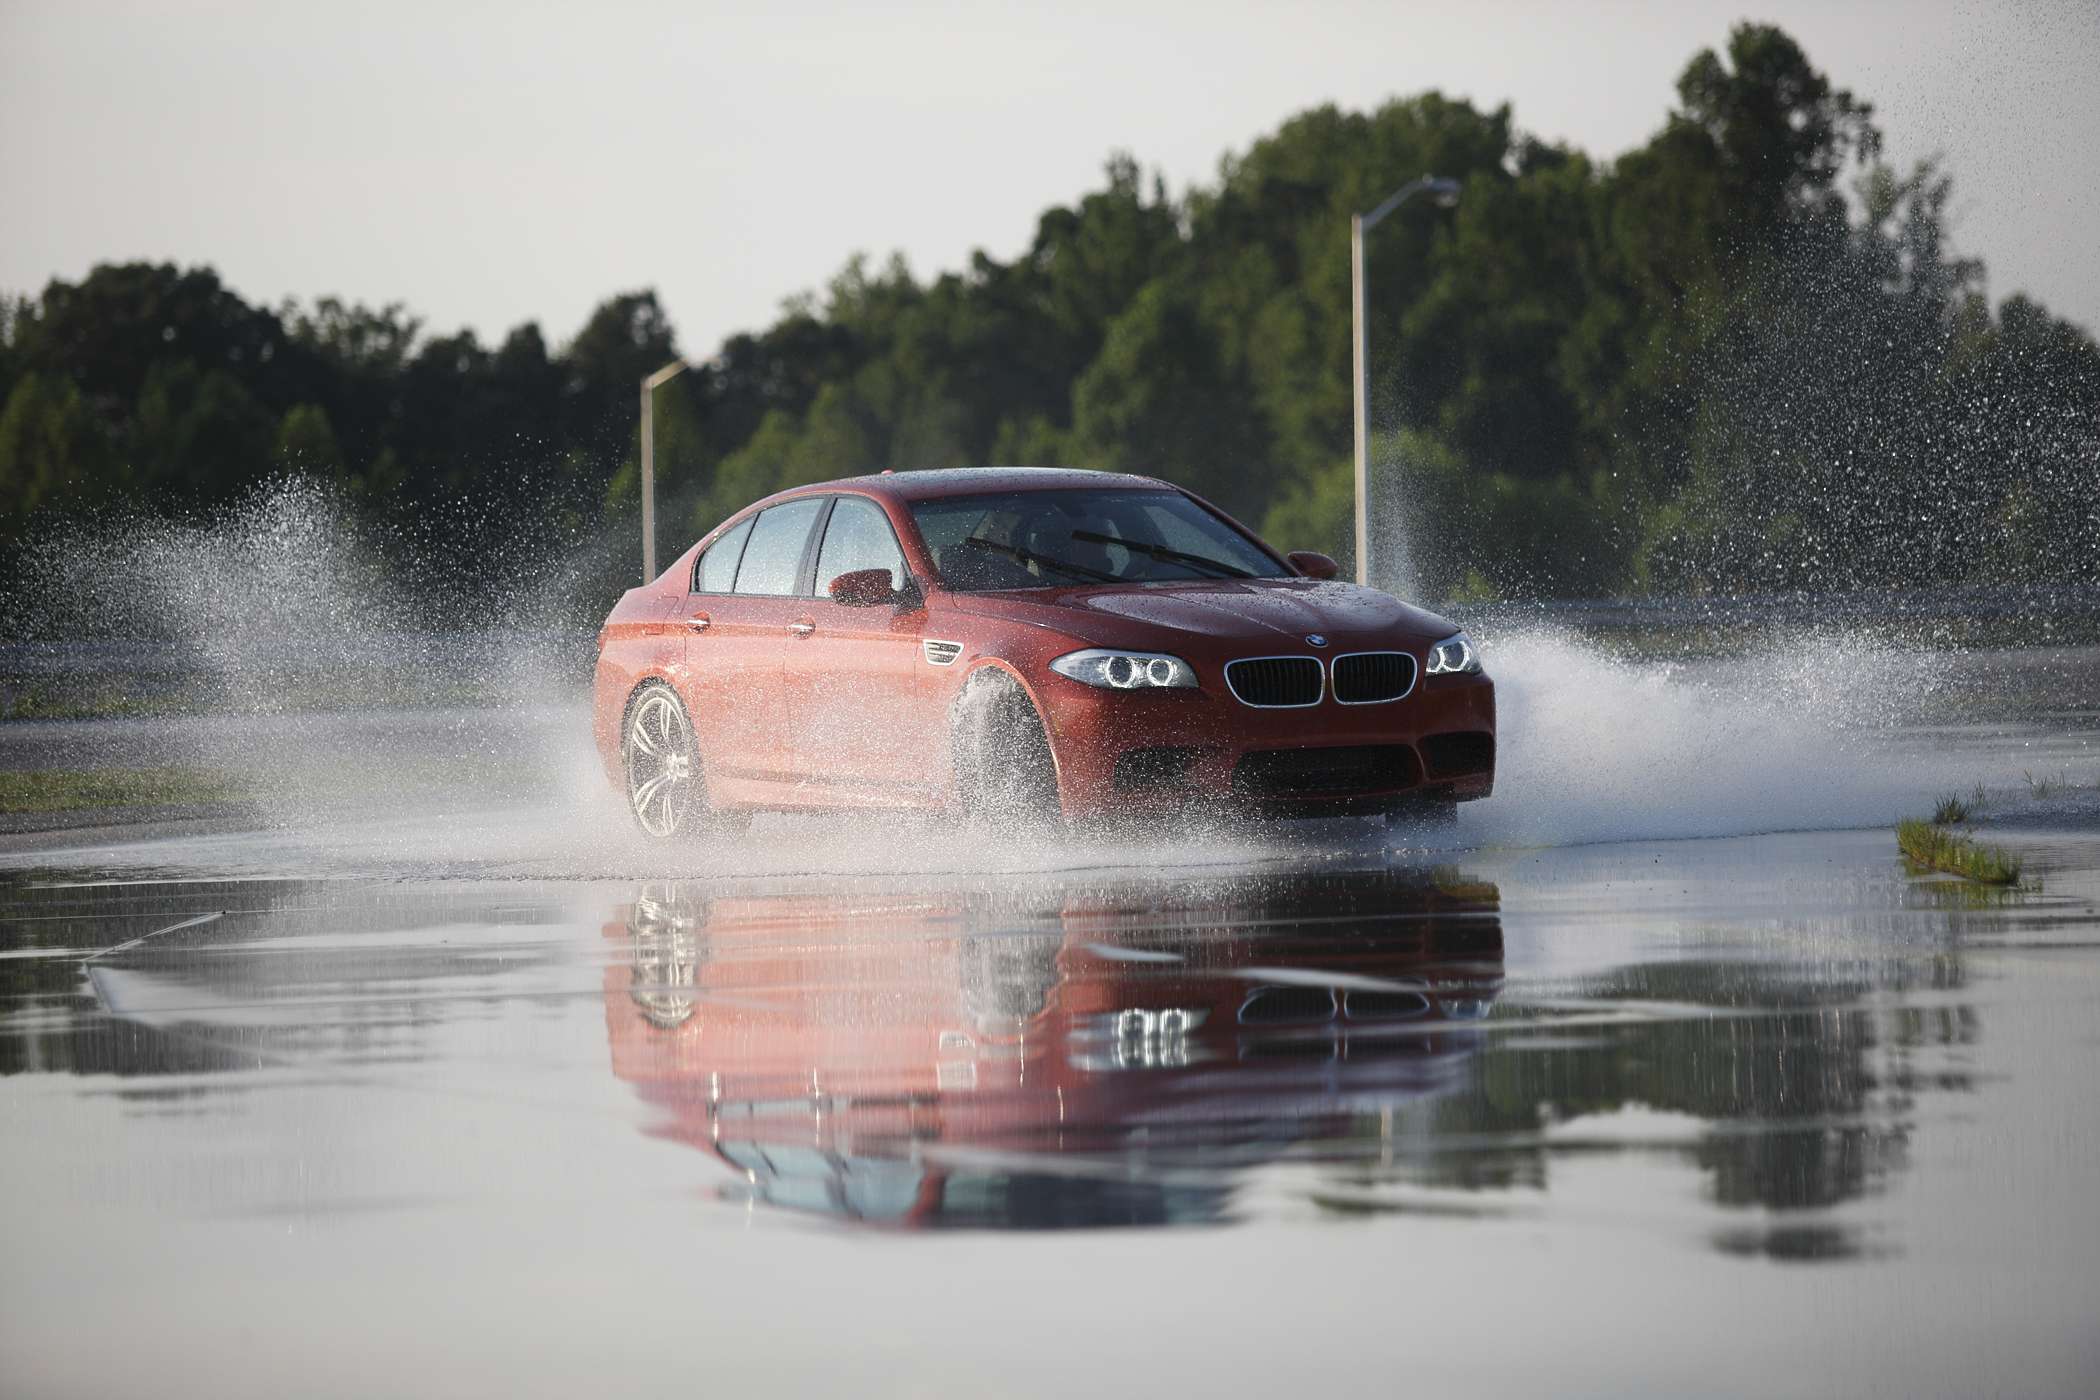 Drivers with a need for more excitement can take a thrill ride at BMW Performance Center.